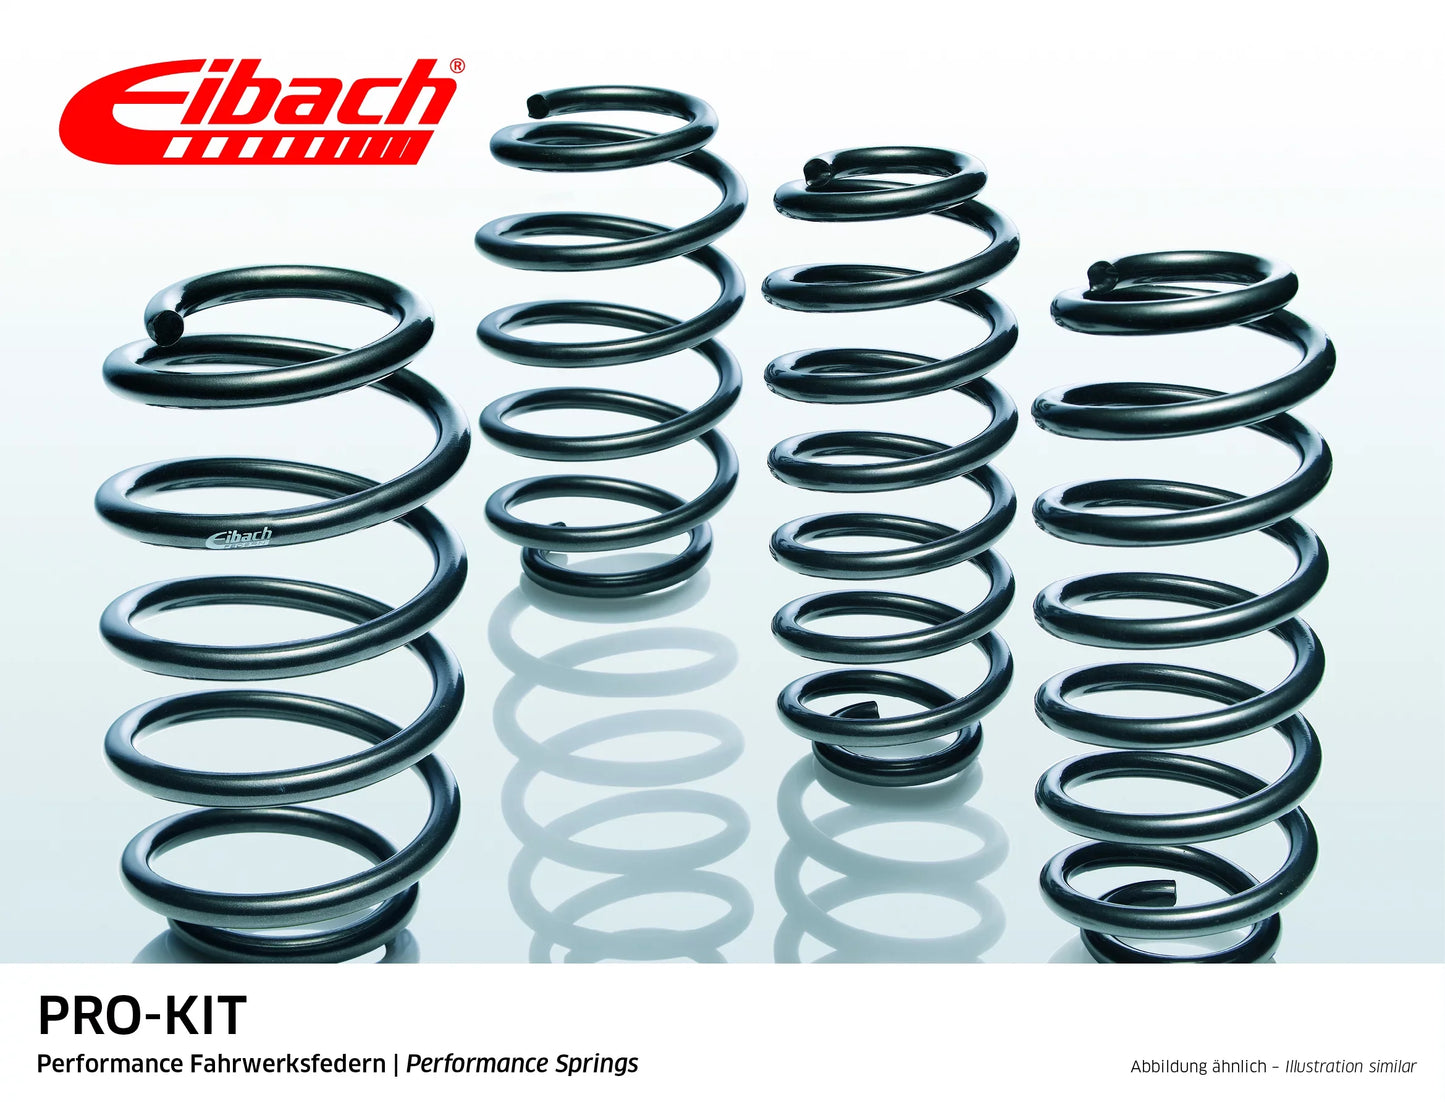 Eibach Pro-Kit Lowering Springs (E10-15-008-09-22) at £305.56